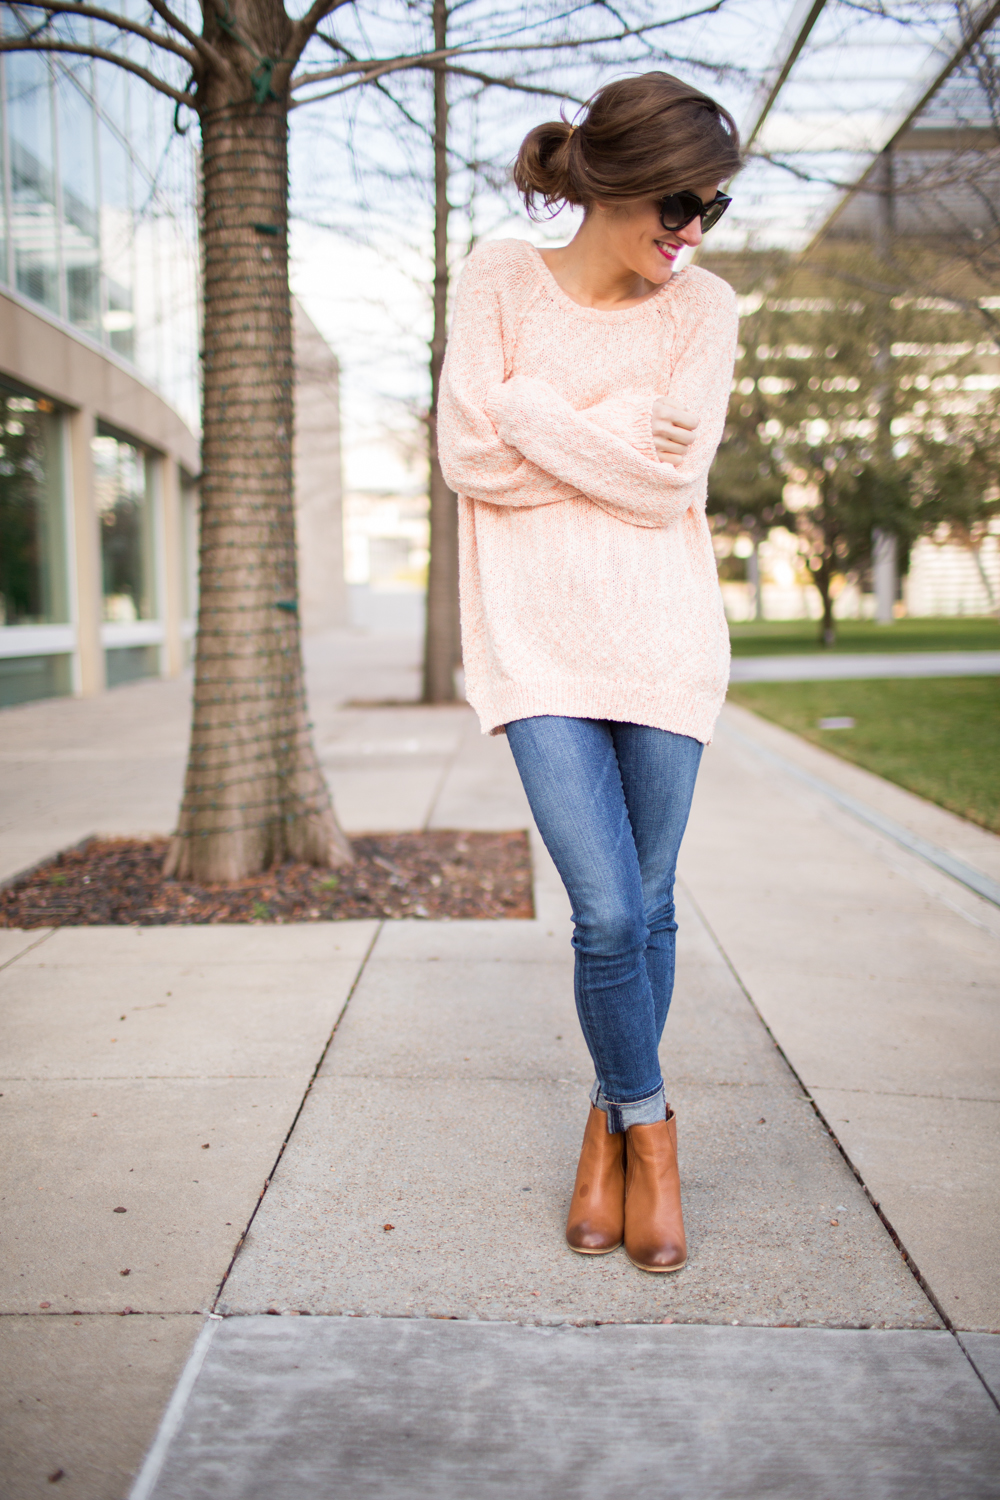 oversized sweater, blue jeans, cognac leather ankle booties, rolled up jeans and ankle booties, messy pony tail, simple casual fall outfit, comfy and casual fall outfit idea, oversized sweater and jeans outfit